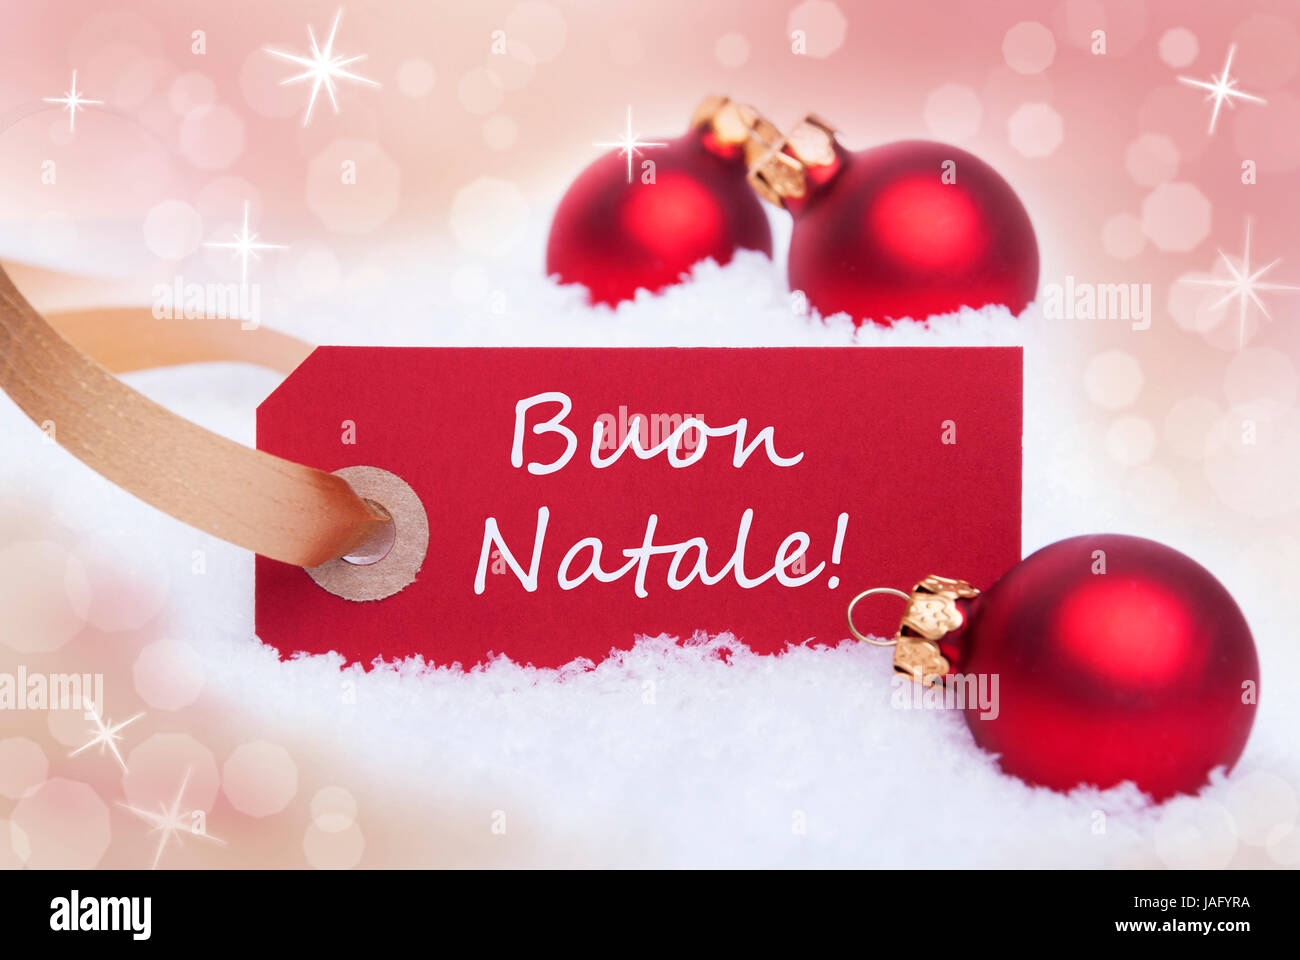 Buon Natale Pics.A Red Label With The Italian Words Buon Natale Which Means Merry Stock Photo Alamy